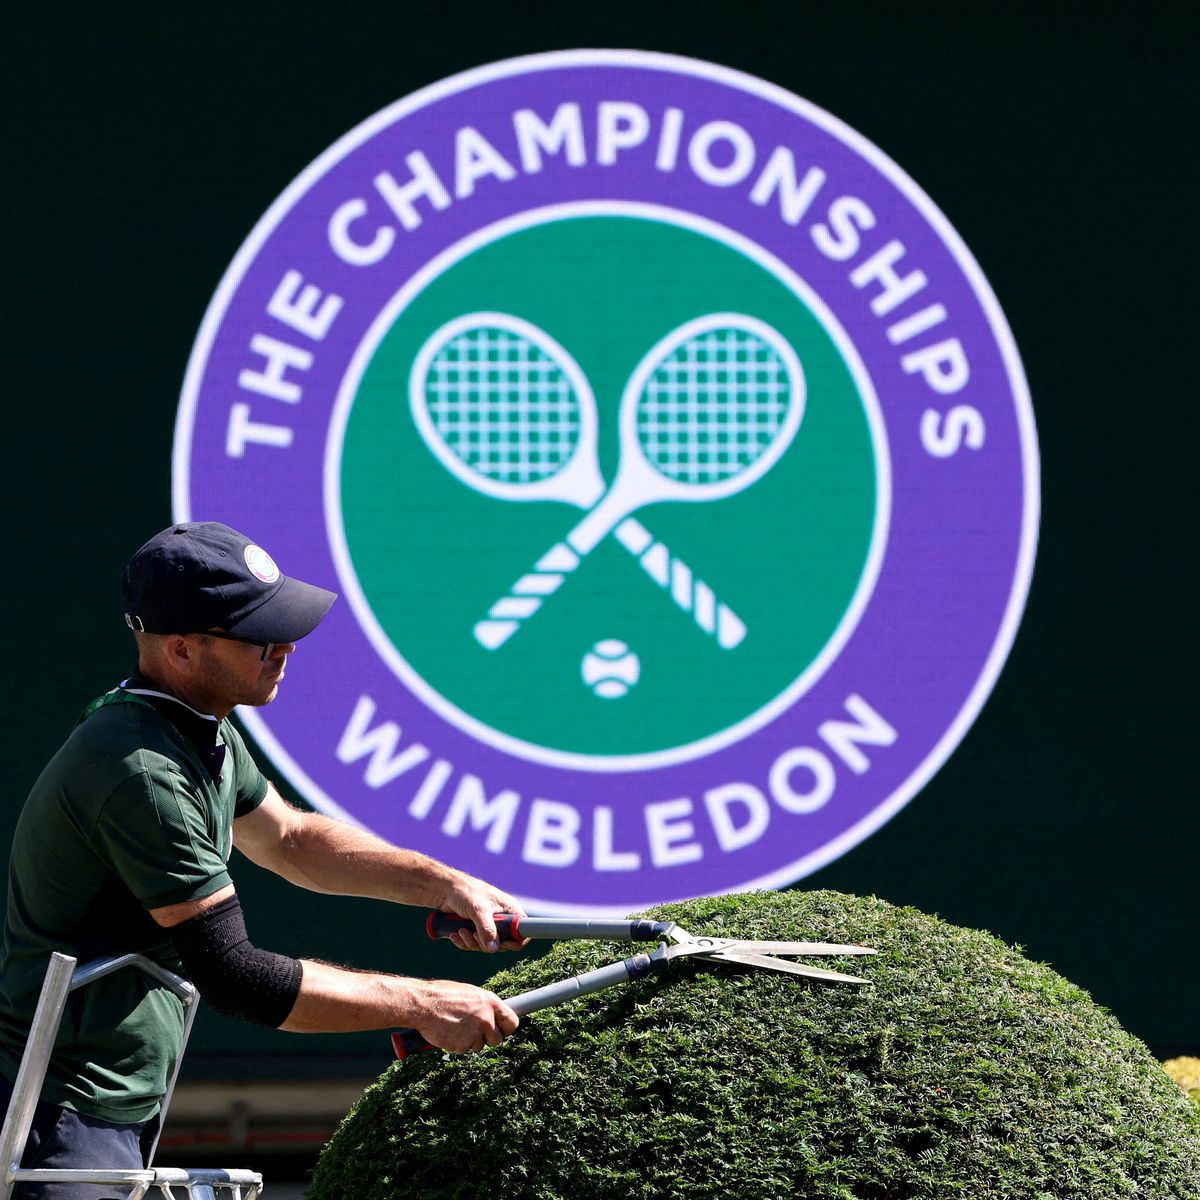 🎾#Wimbledon Six elegant #cryospa ice baths provide much-needed relief for athletes with two more in the practice area. The Royal Tennis Club in Stockholm and Rafa Nadal's Tennis Academy have also joined the trend, recognising the importance of recovery. #Chilling4Champions